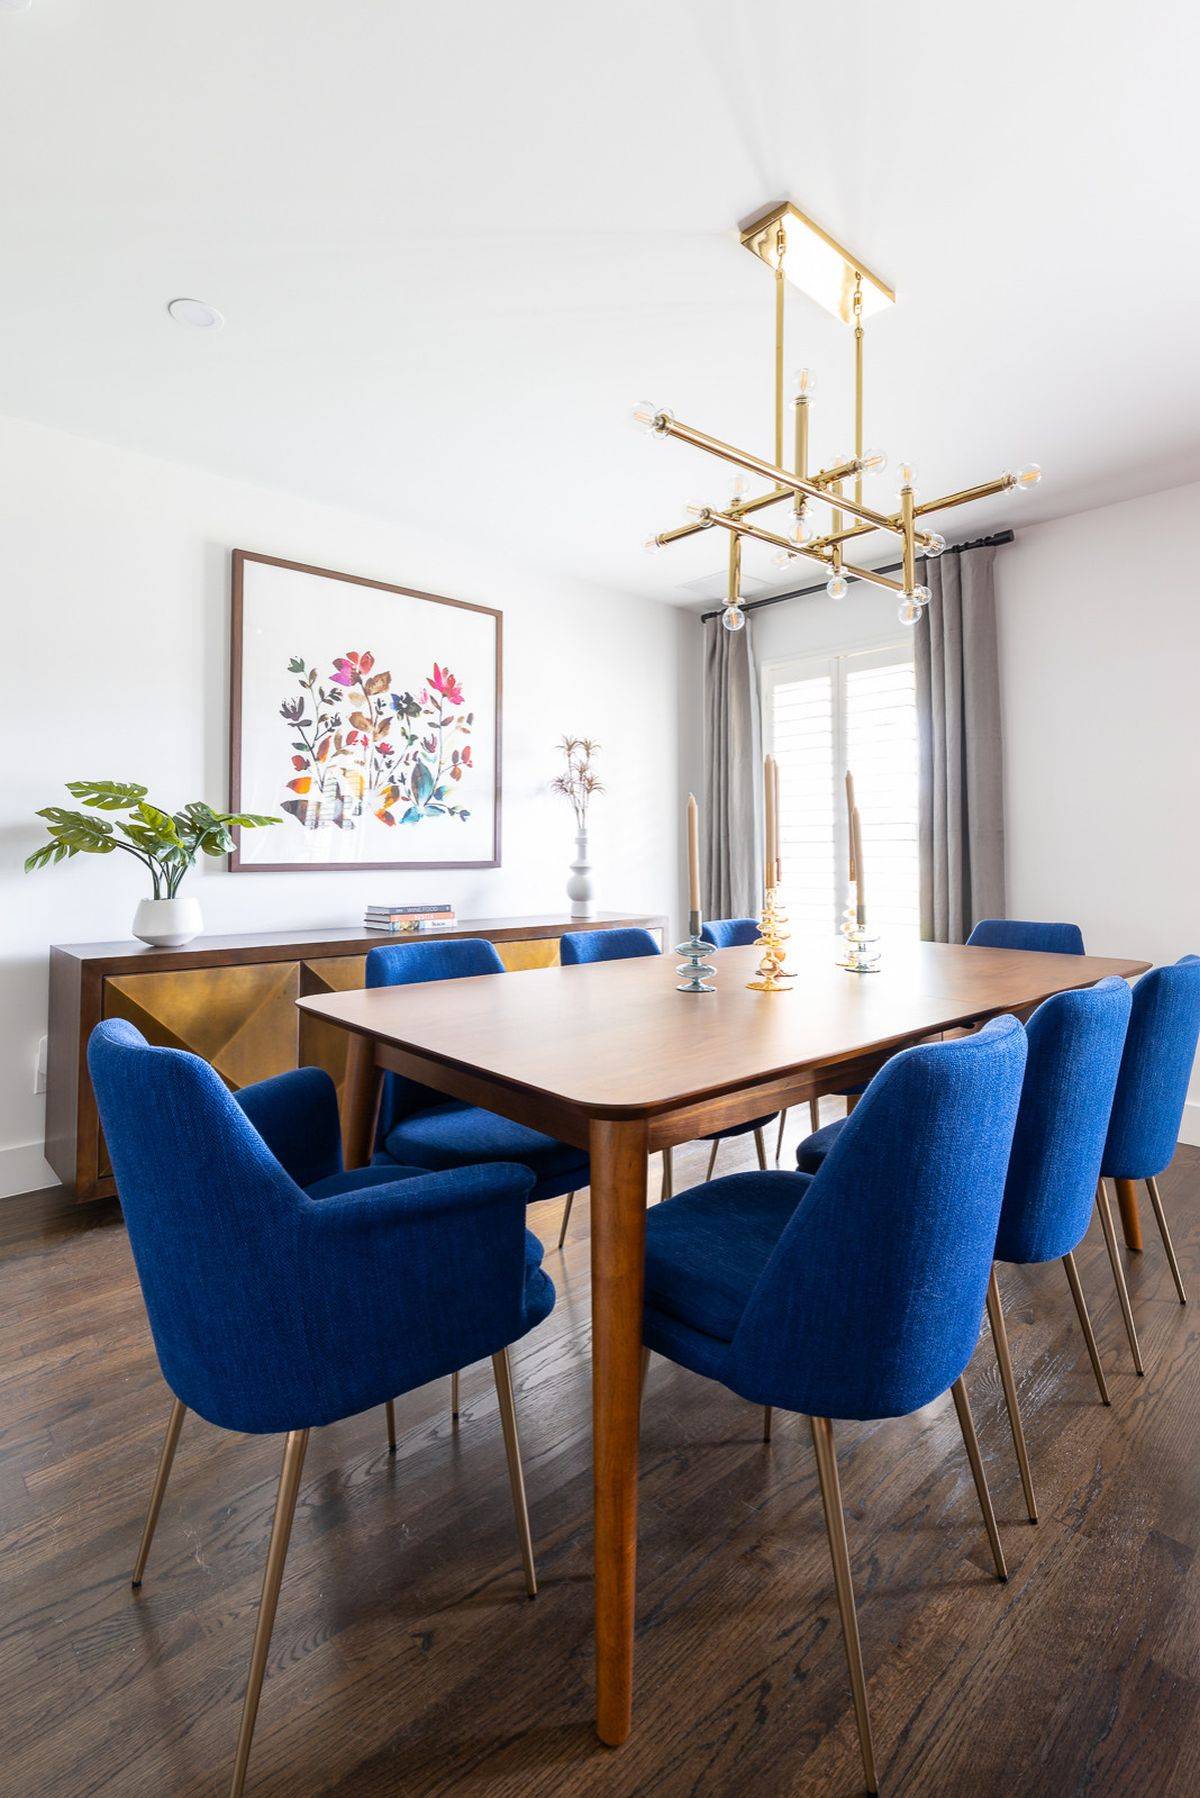 Comfortable-dining-table-chairs-bring-blue-to-this-modern-white-dining-room-88187